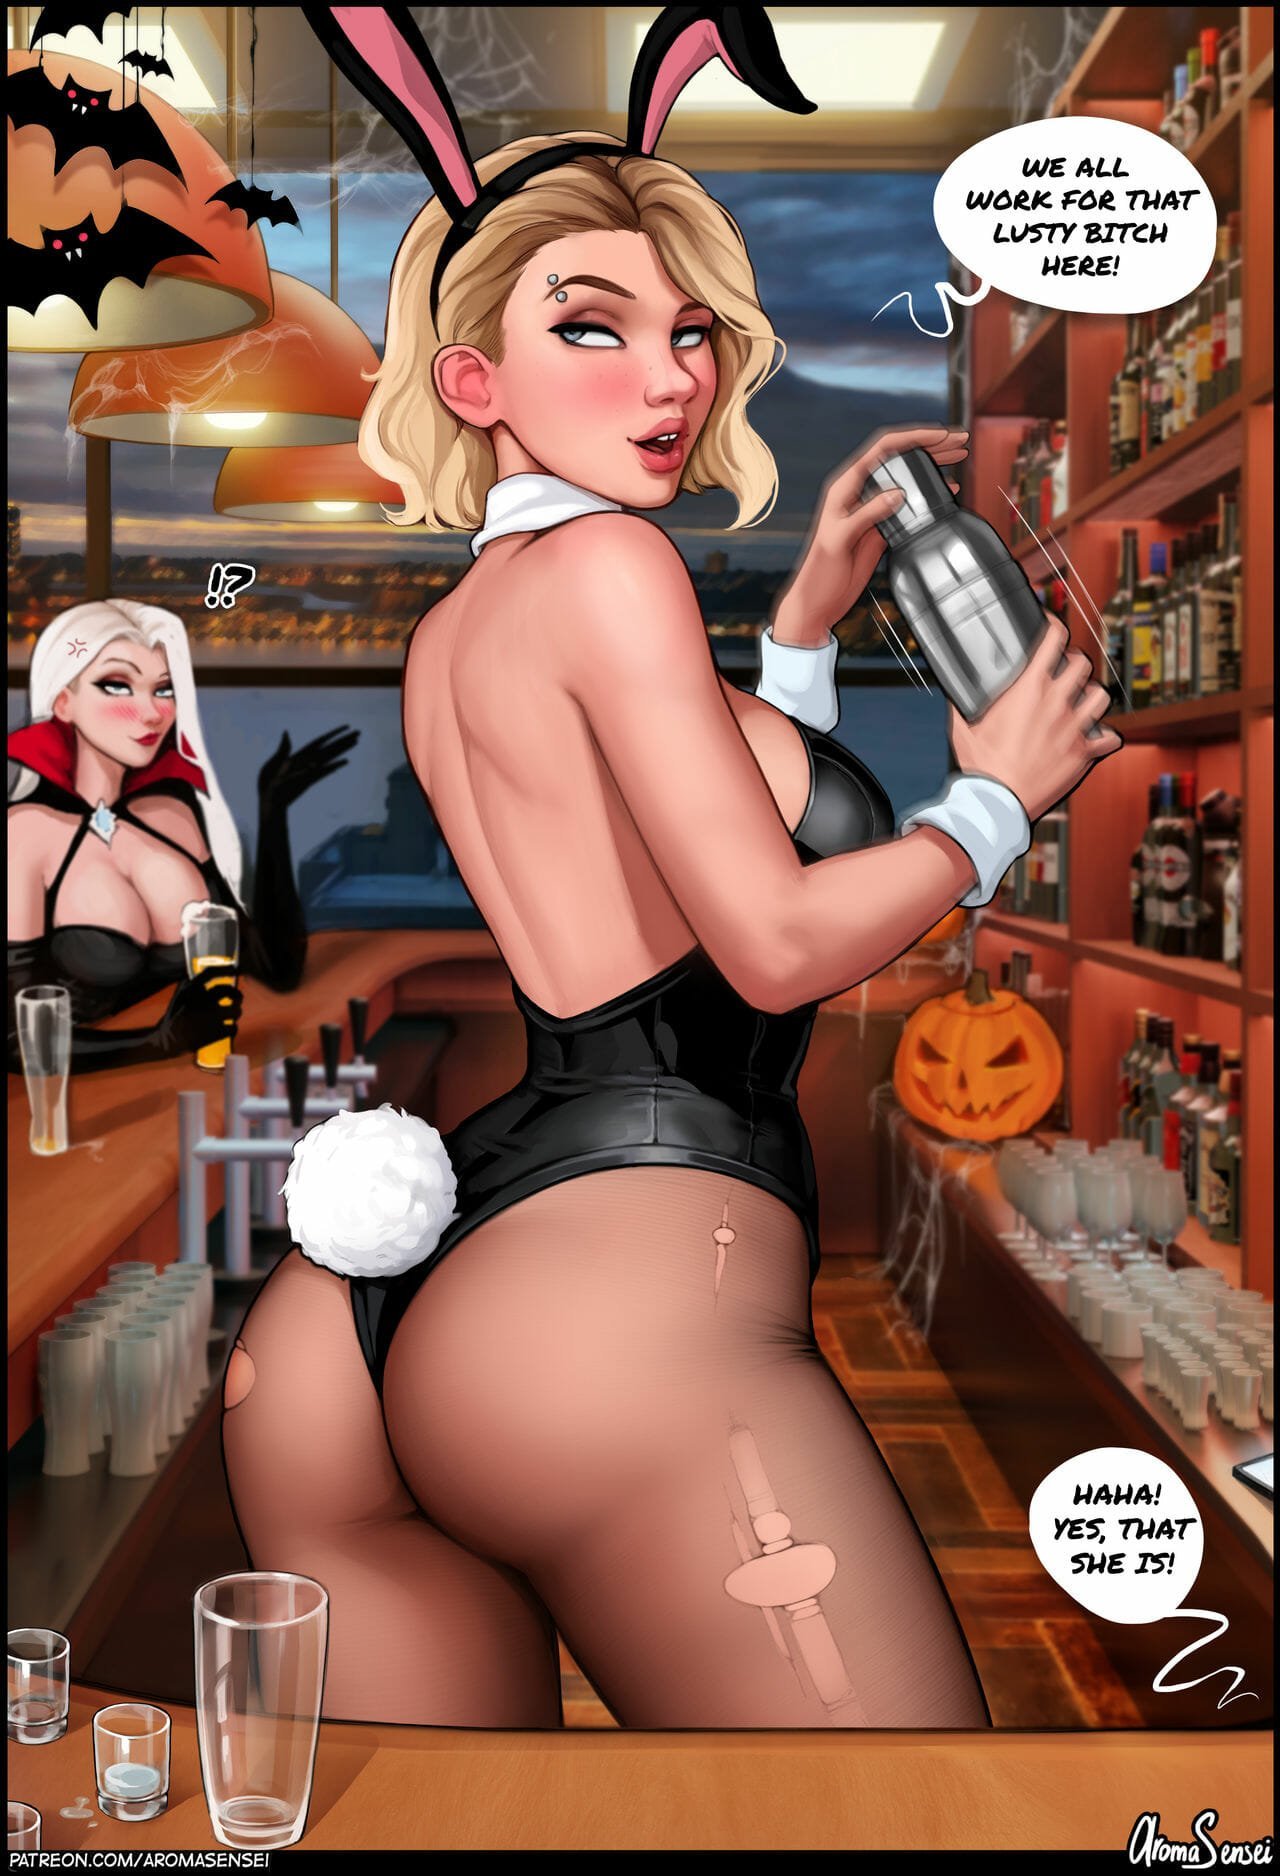 She Male Sex Halloween Party - Halloween Party at Frozen Inc. comic porn - HD Porn Comics